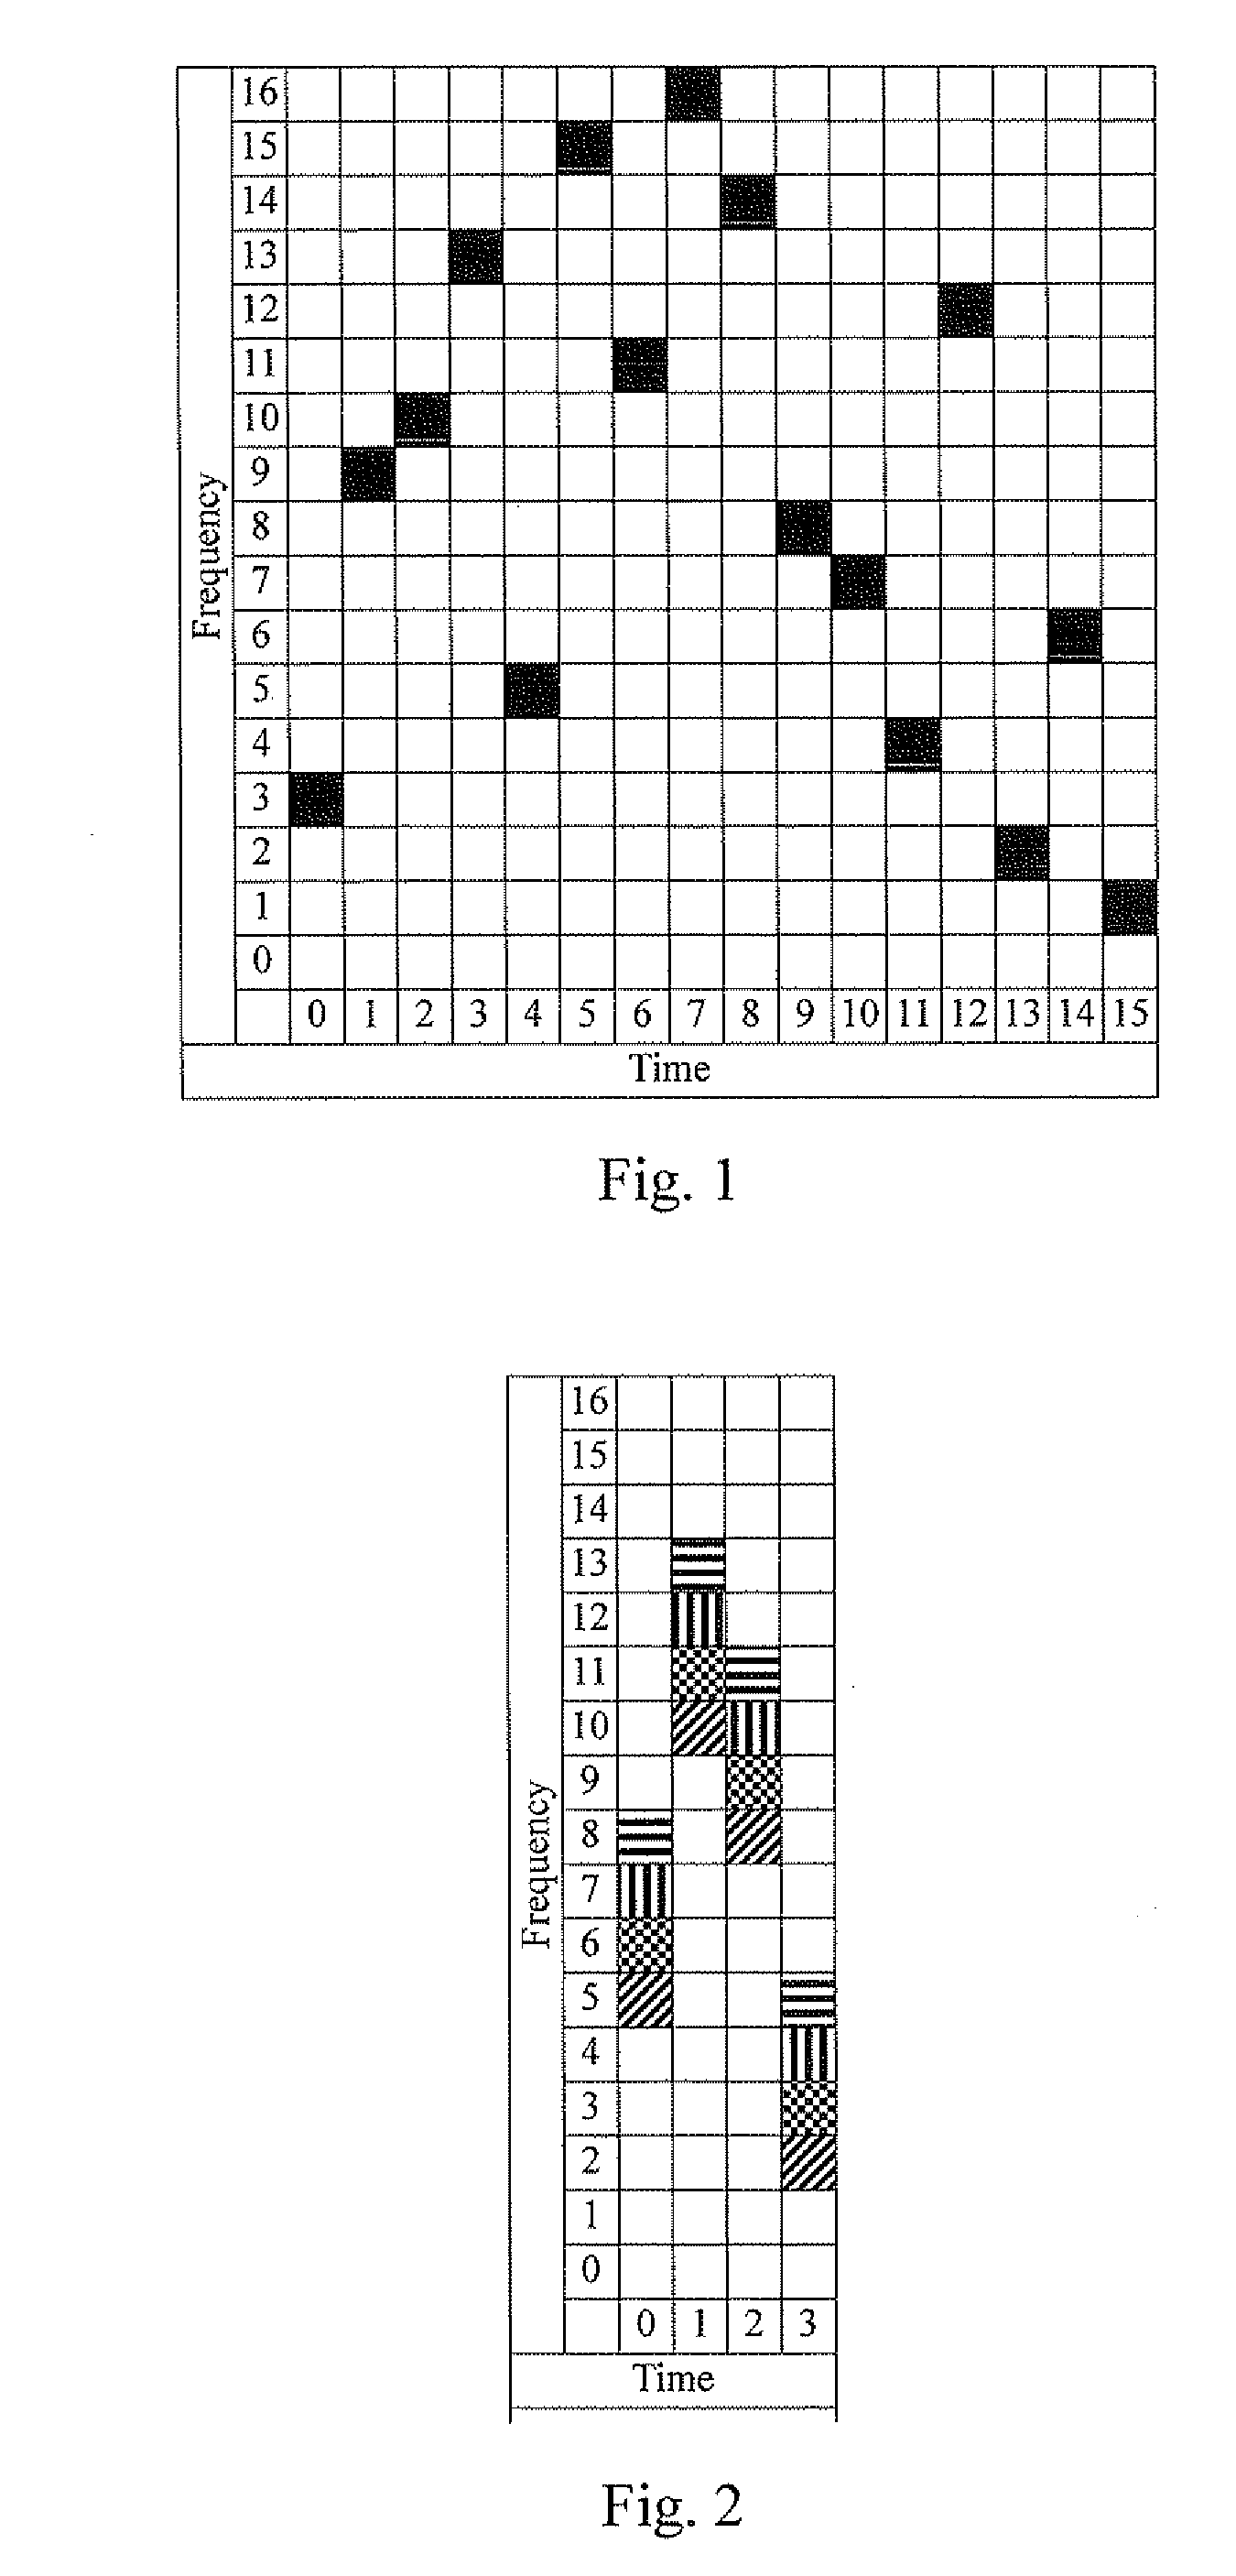 Method for Allocating Time-Frequency Resources in a Communication System